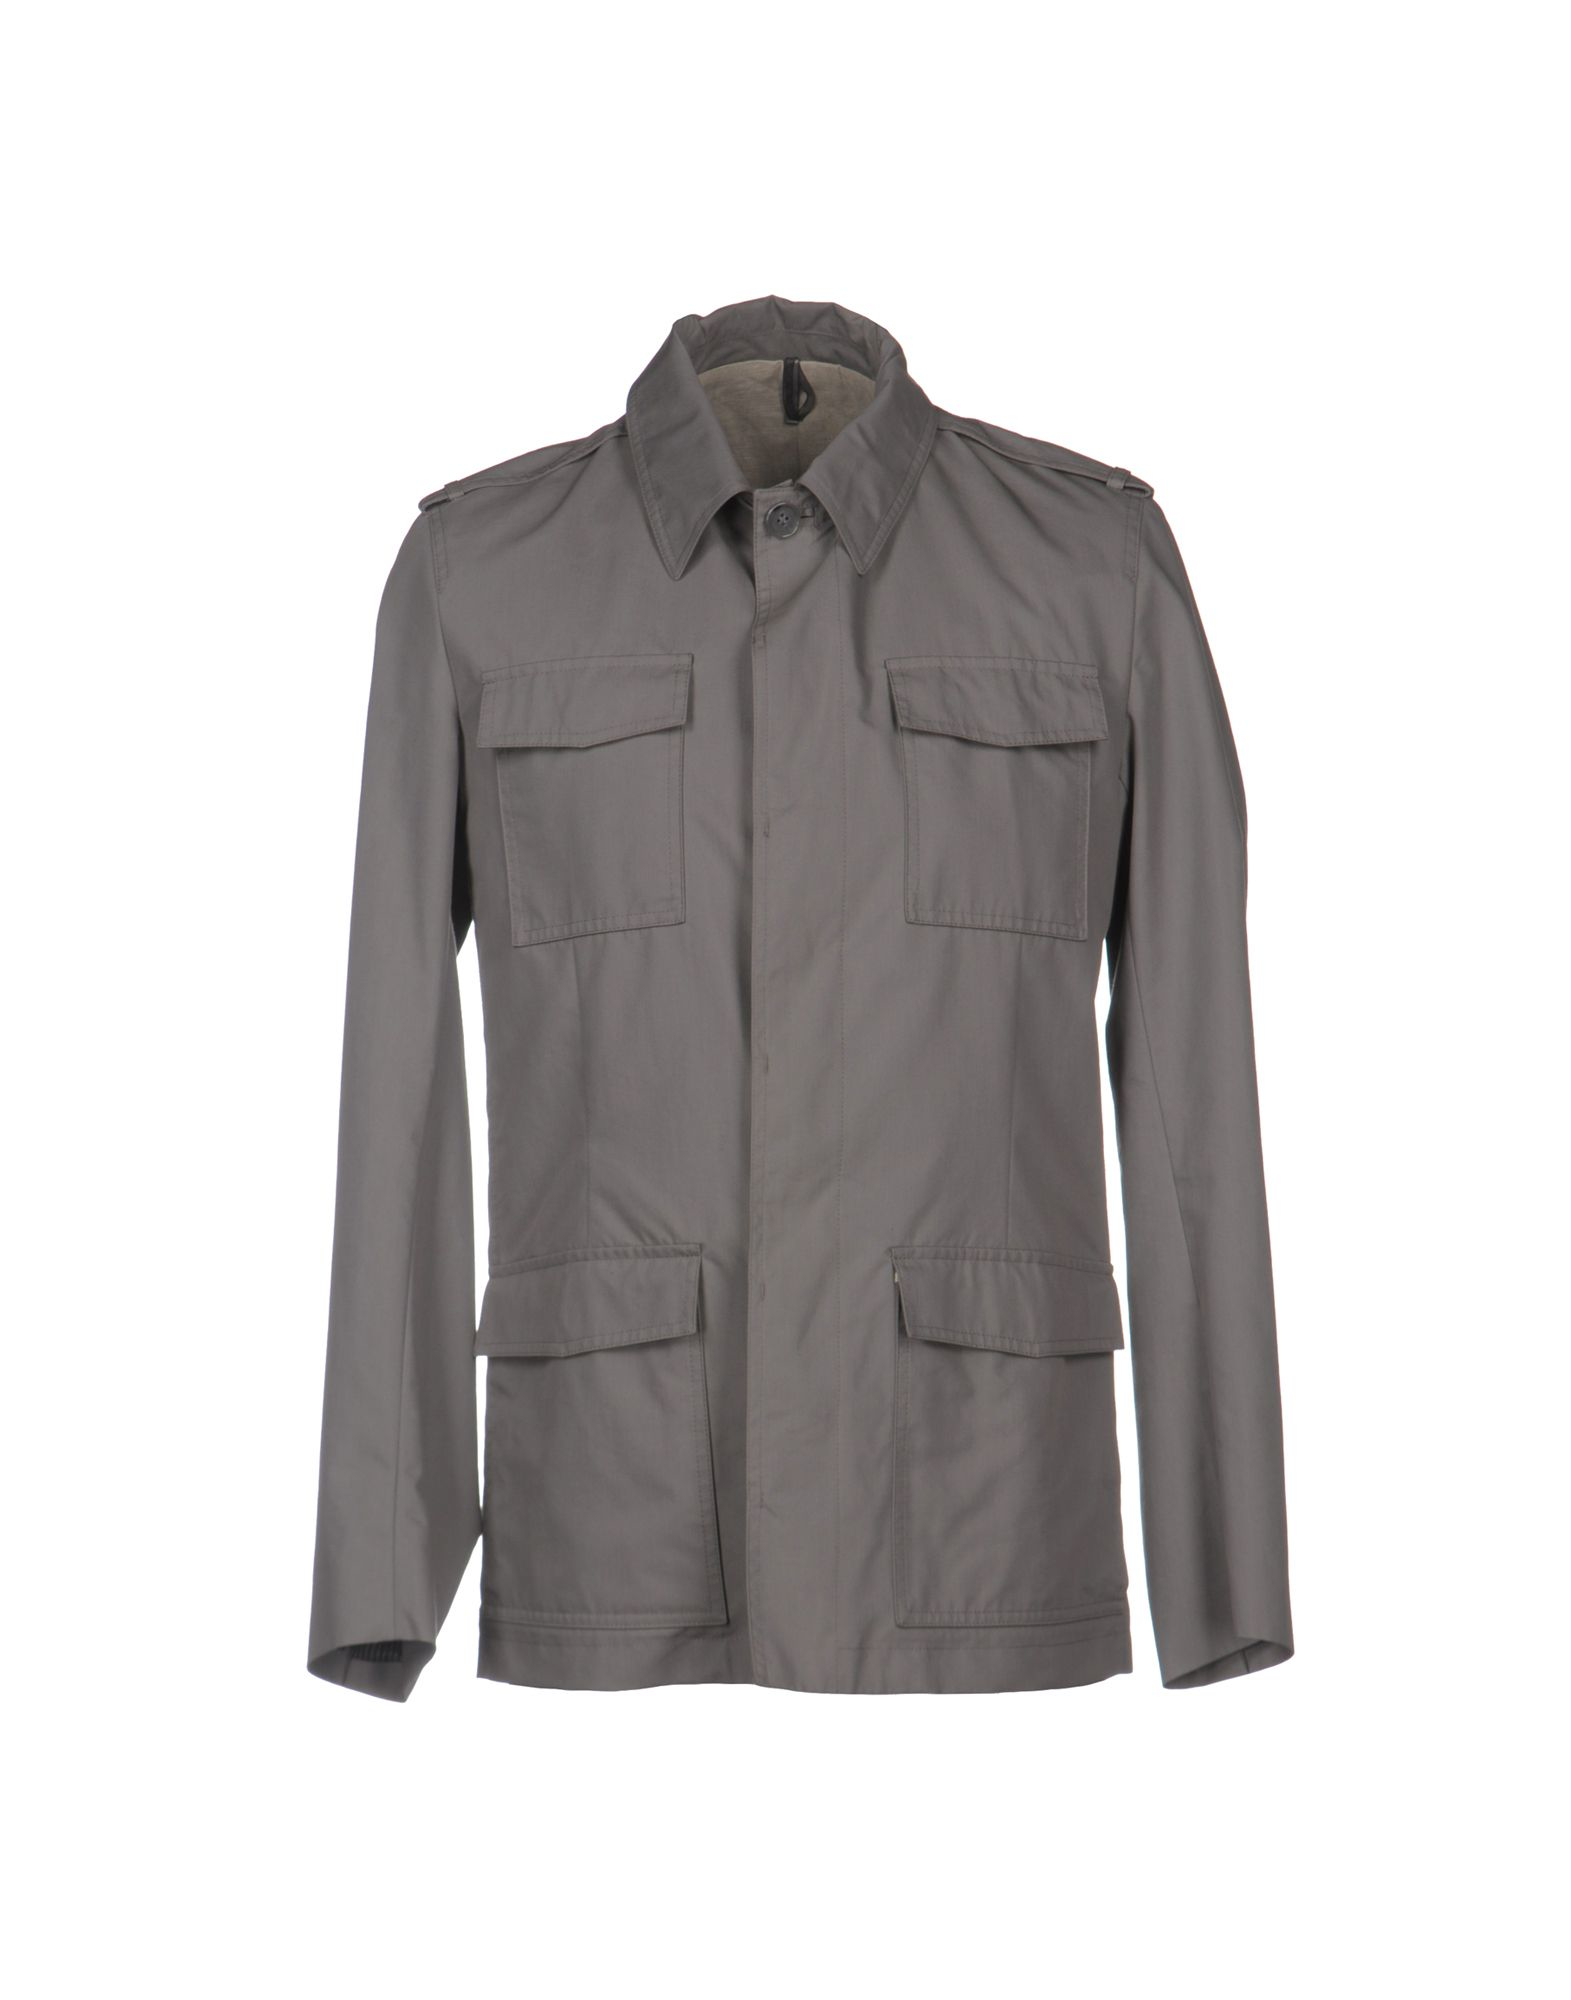 Lyst - Dior Homme Jacket in Gray for Men